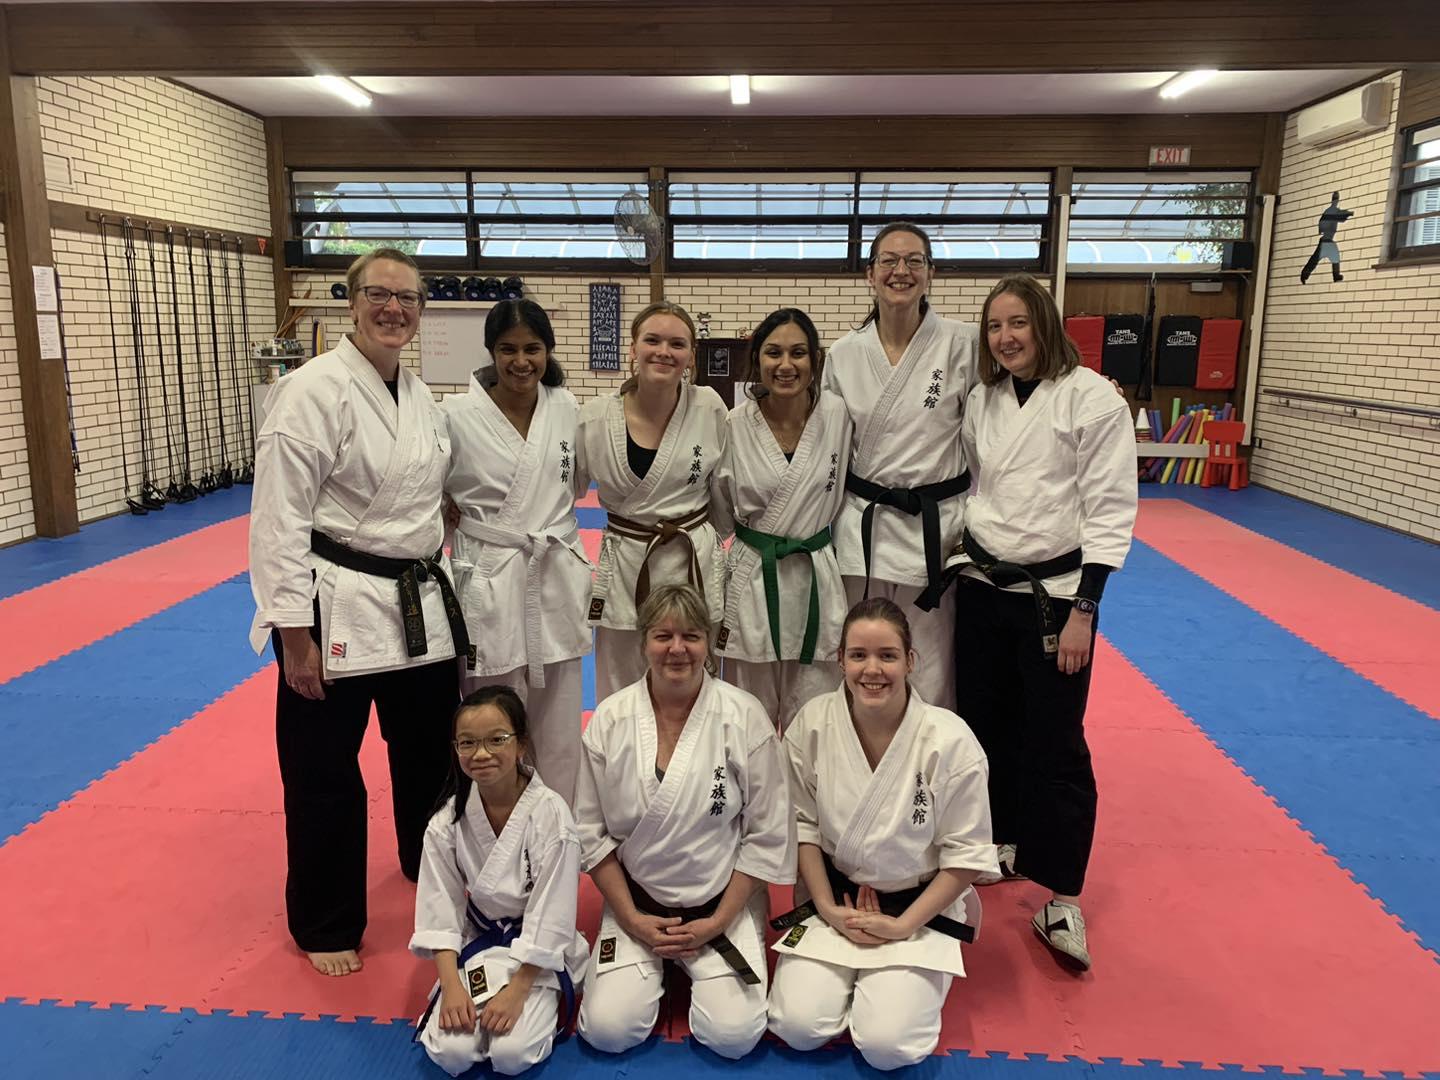 Group of smiling girls and women of different ages wearing karate uniforms in a karate dojo